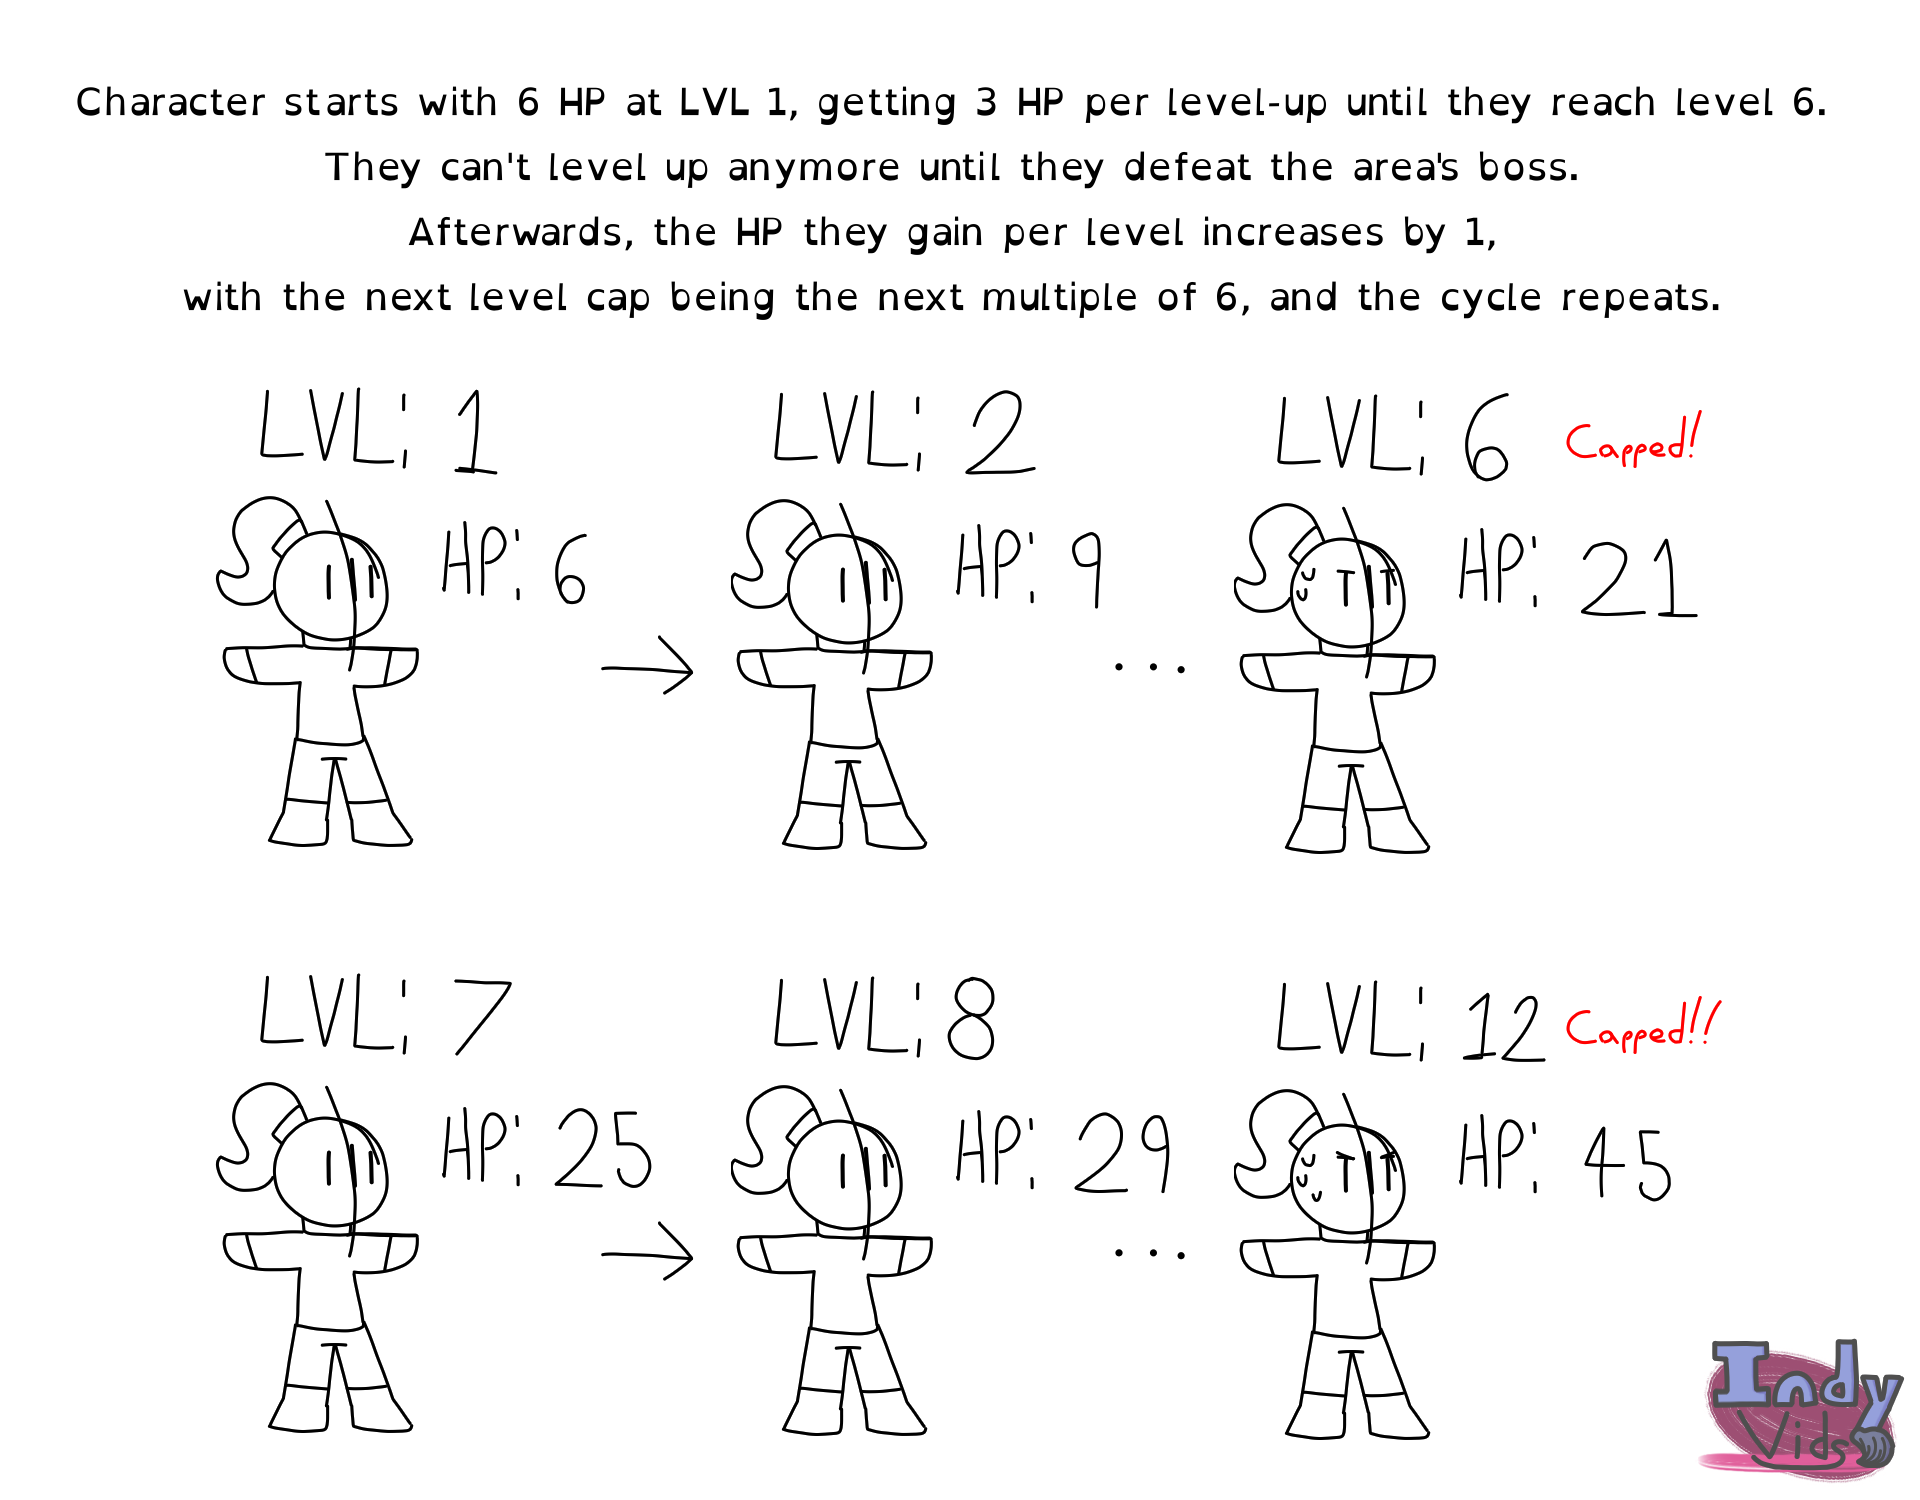 A sketch visually explaining an idea for an RPG, with text at the top.